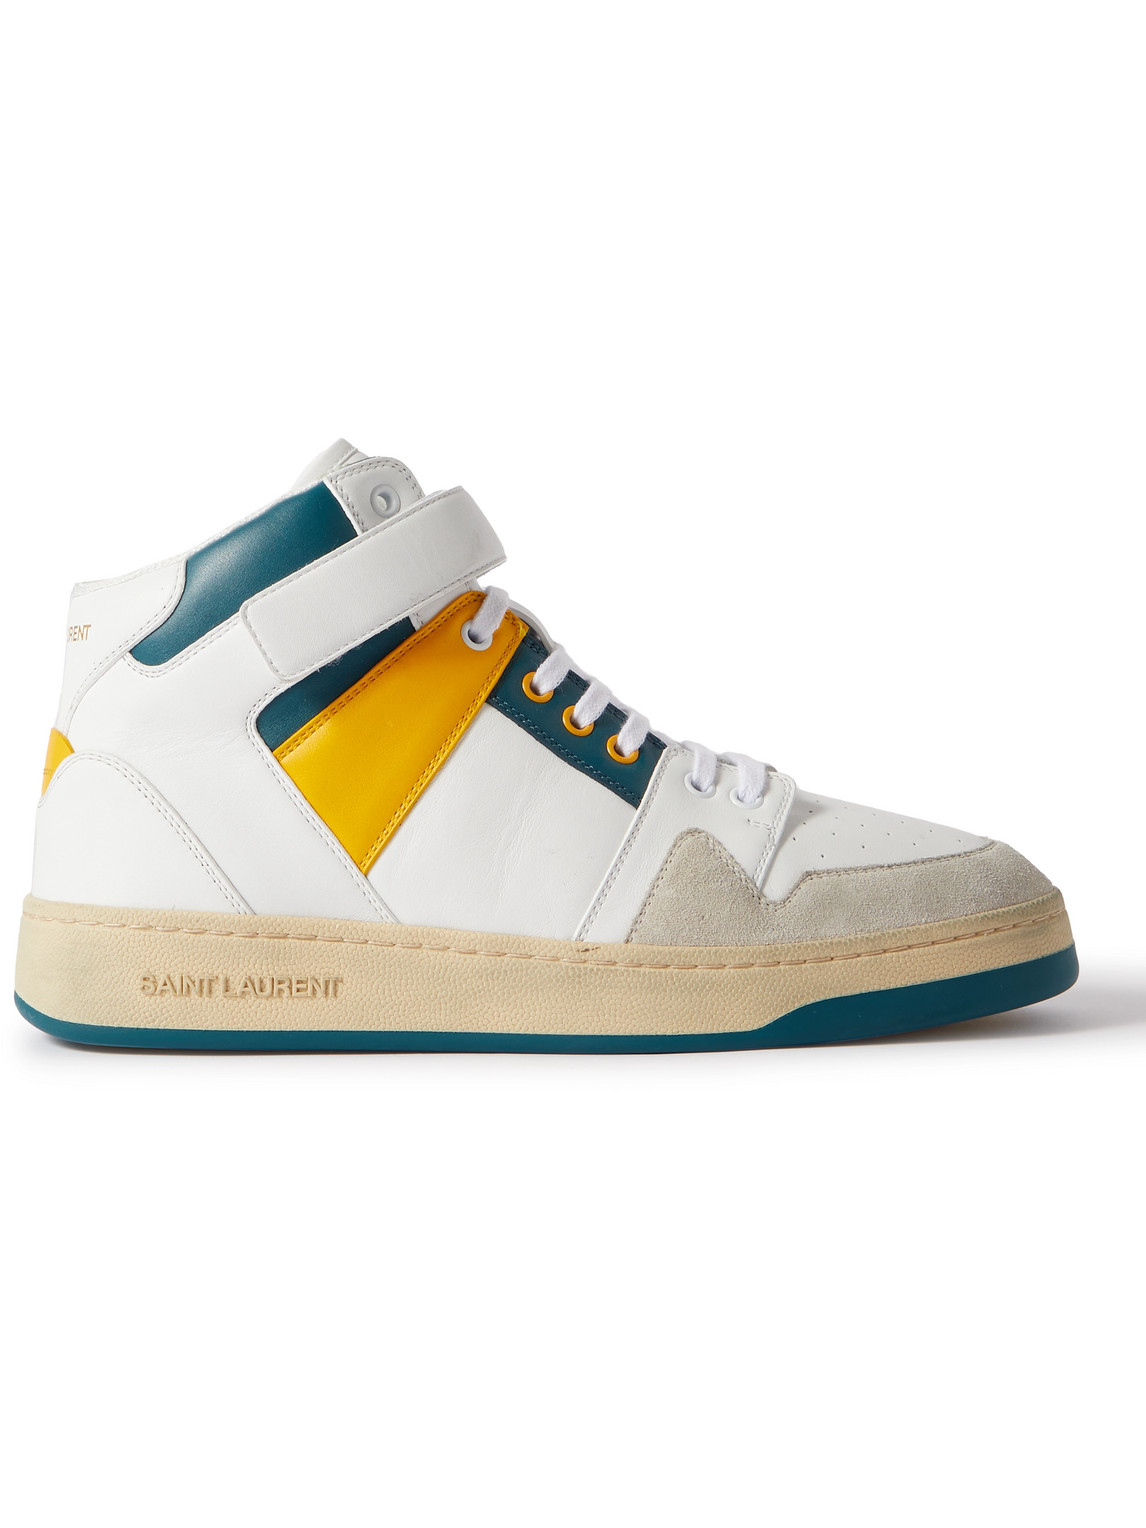 Saint Laurent Lax Colour-block Leather And Suede High-top Sneakers In White